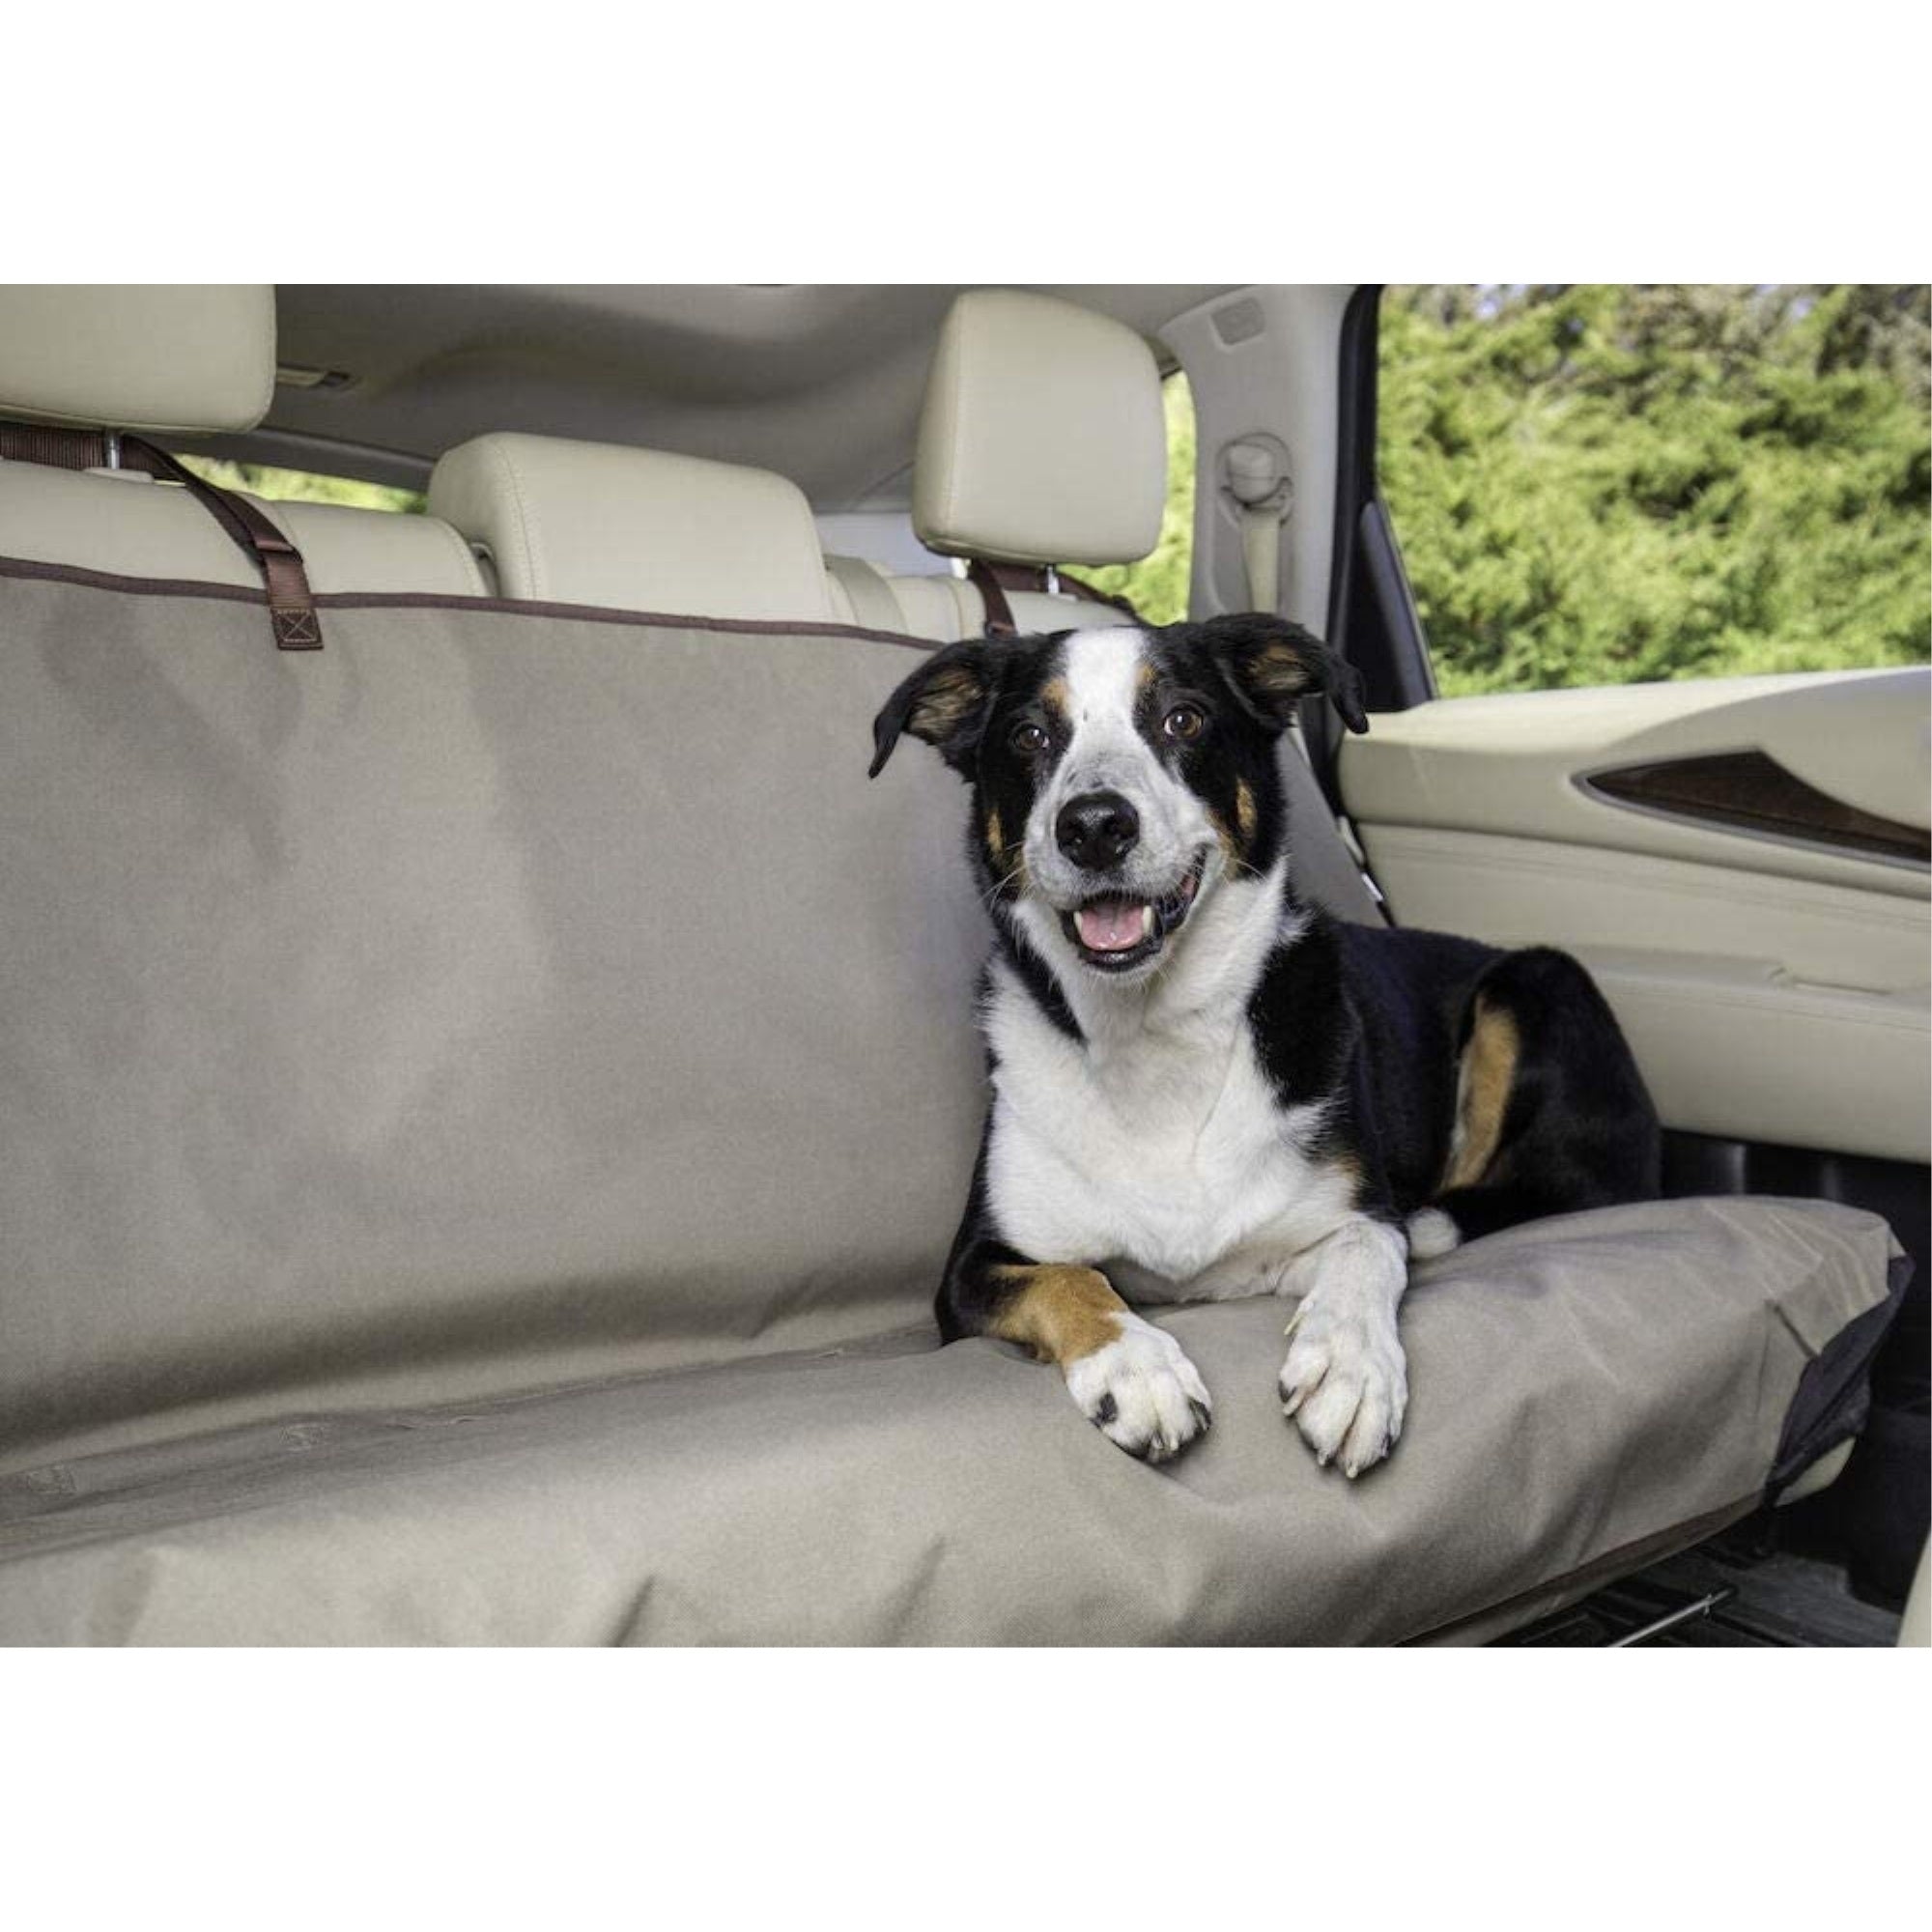 PetSafe Happy Ride Waterproof Bench Cover for Pets, Fits Most Vehicles, Tan